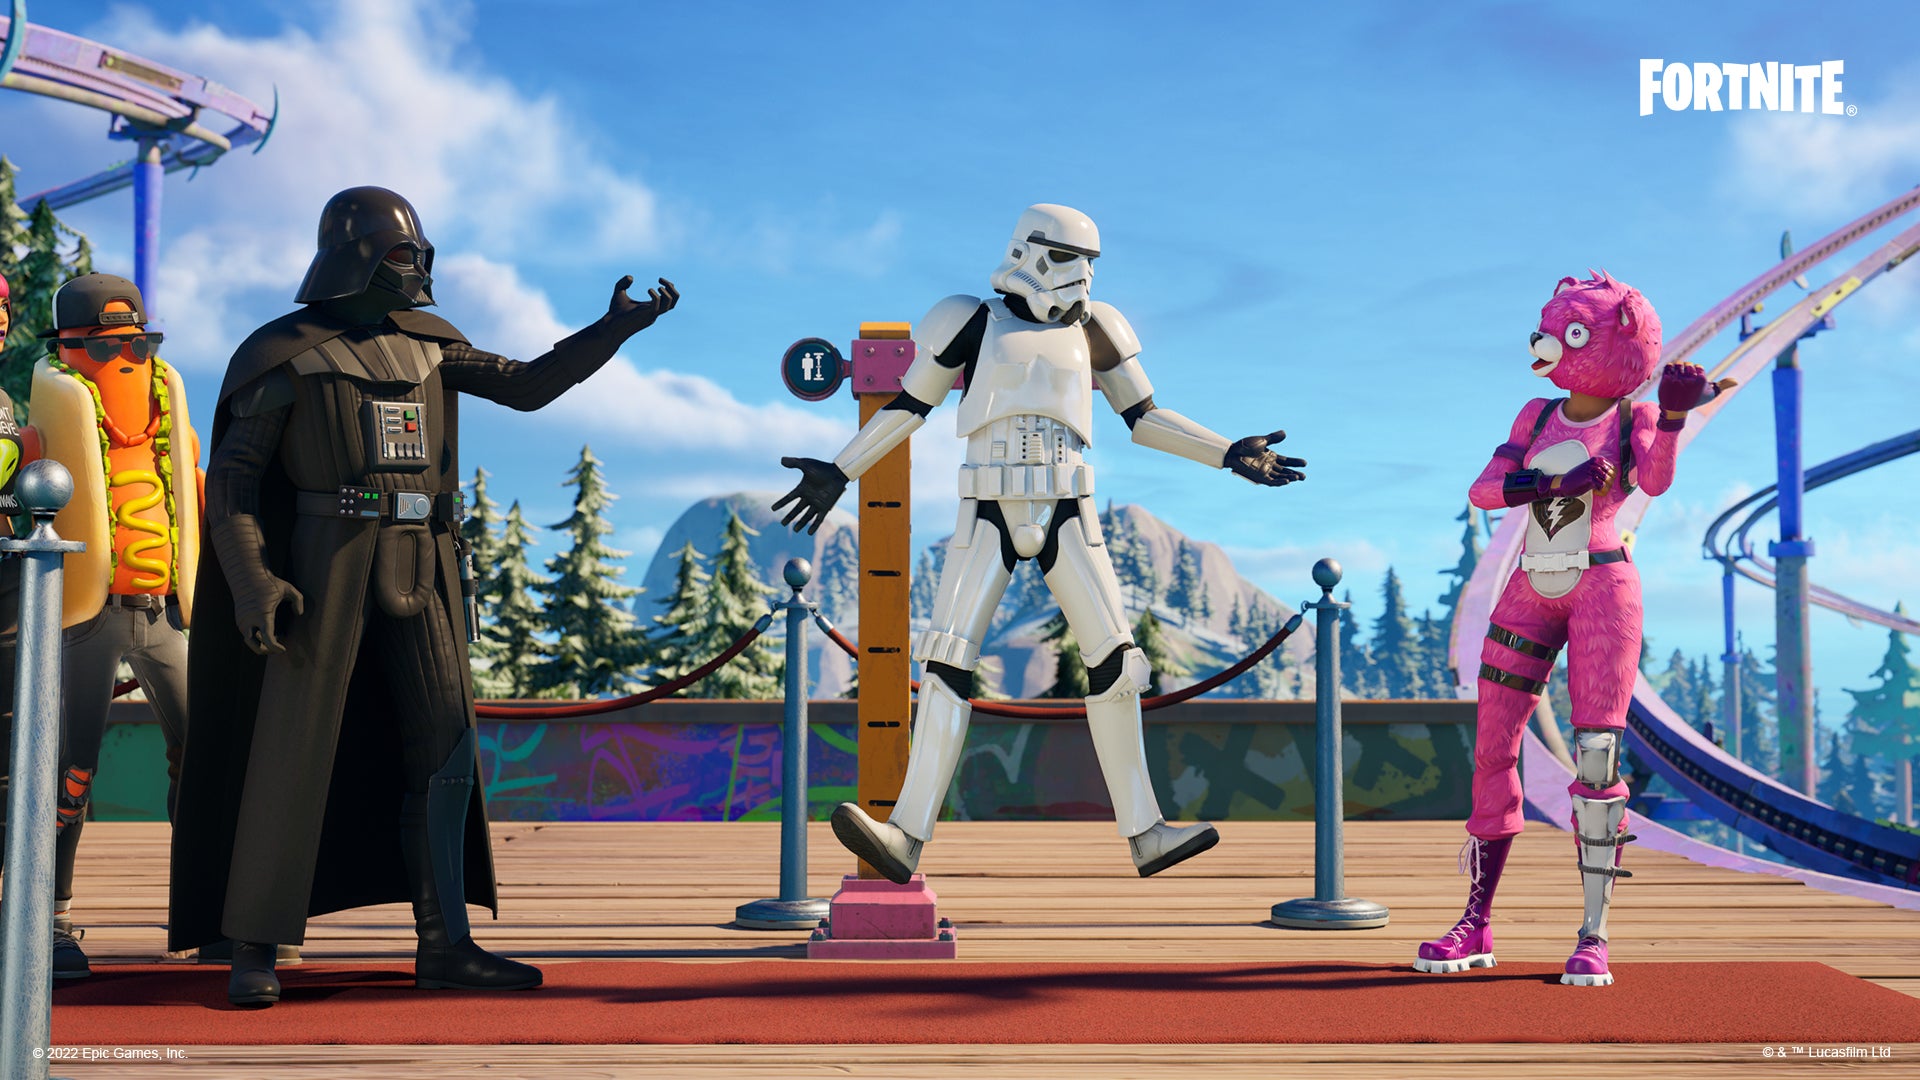 Fortnite Chapter 3 Season 3: Vibin' Features Darth Vader, Indiana Jones, Rideable Wolves, and More